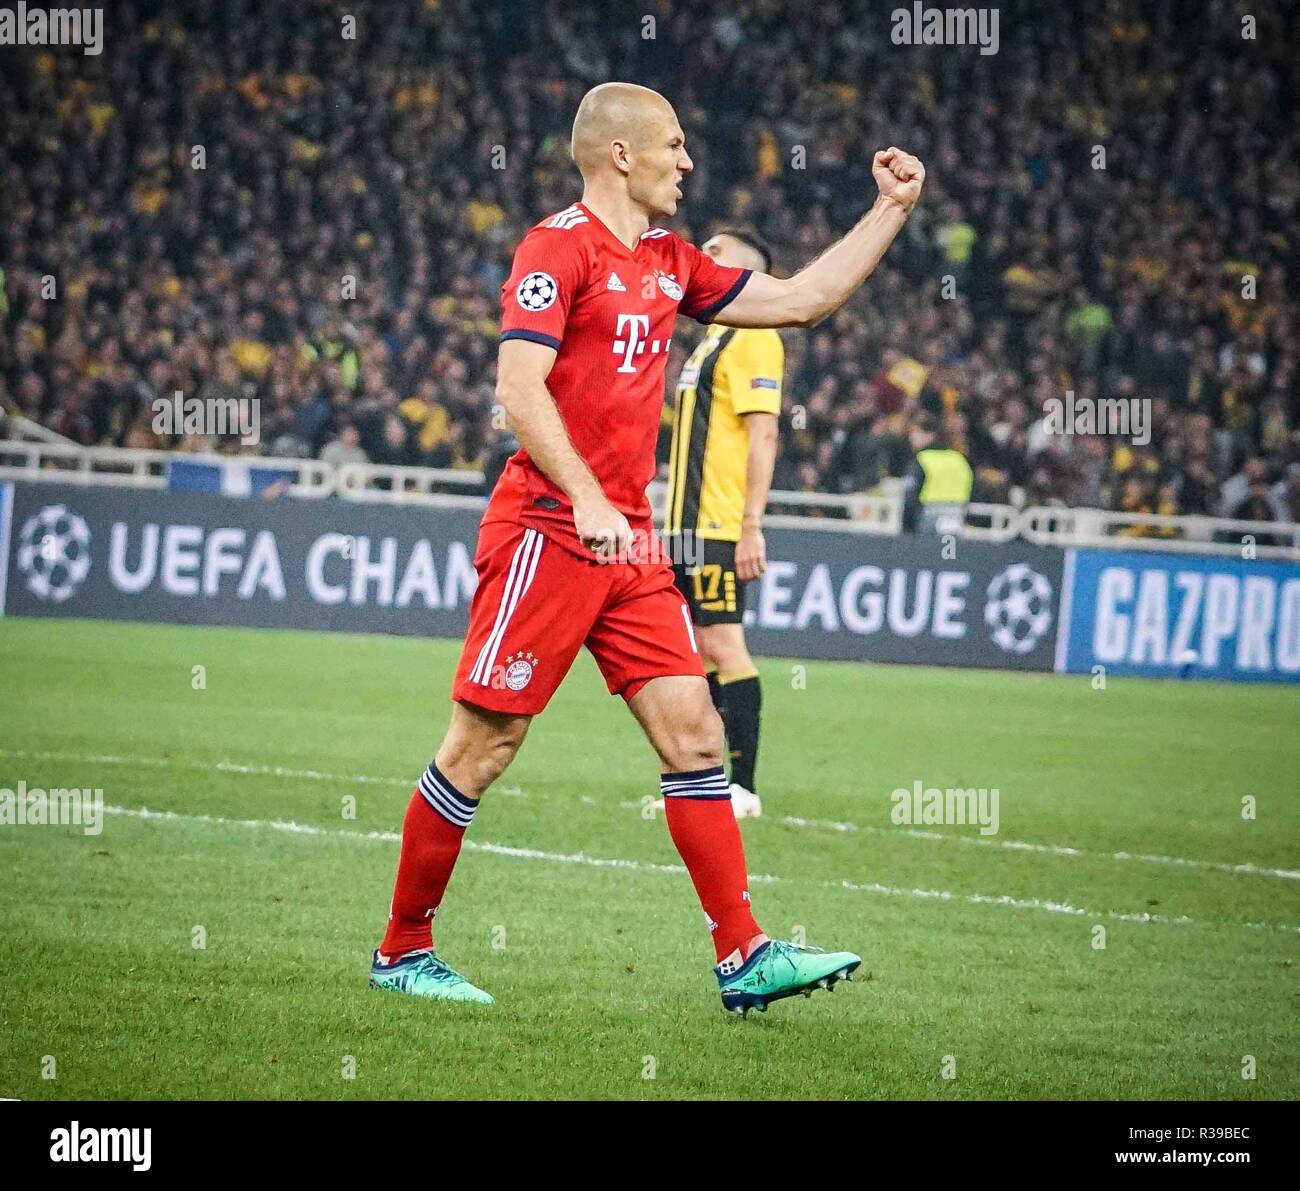 Arjen Robben of Bayern Munich seen celebrating during the Group E match of  the UEFA Champions League between AEK FC and Bayern Munich FC at the  Olympic Stadium in Athens. (Final score